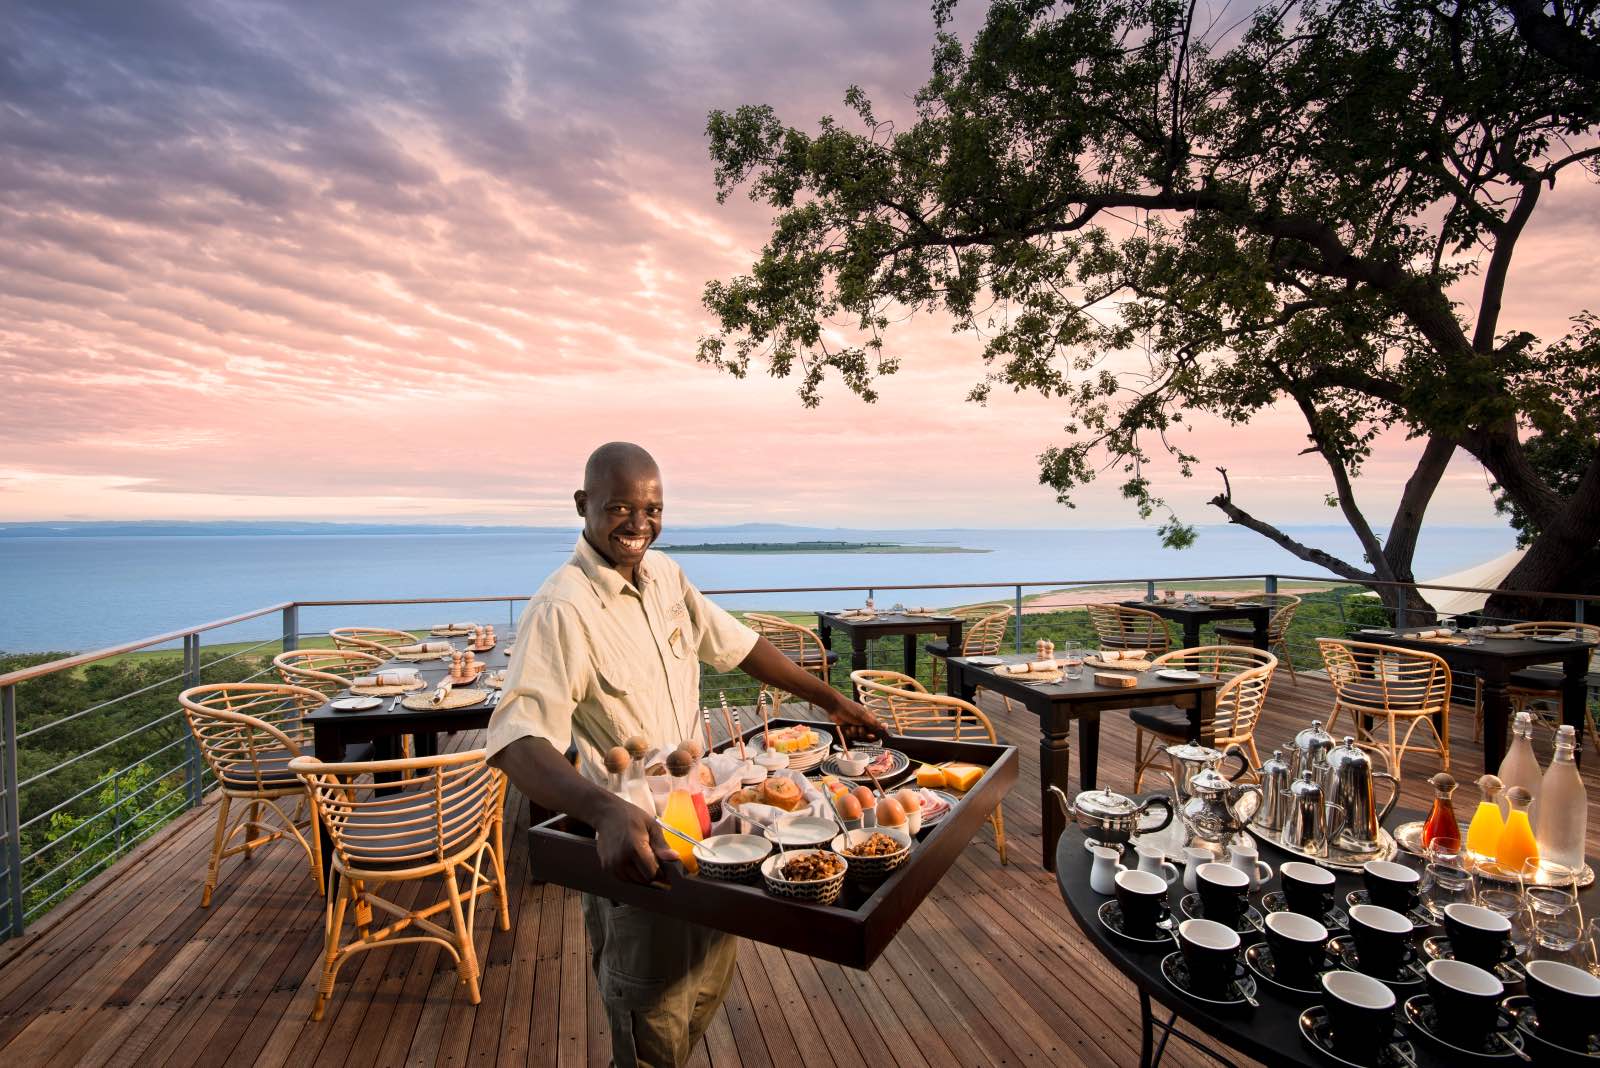 Bumi Hills excellent breakfasts and service on the luxury terrace overlooking Lake Kariba